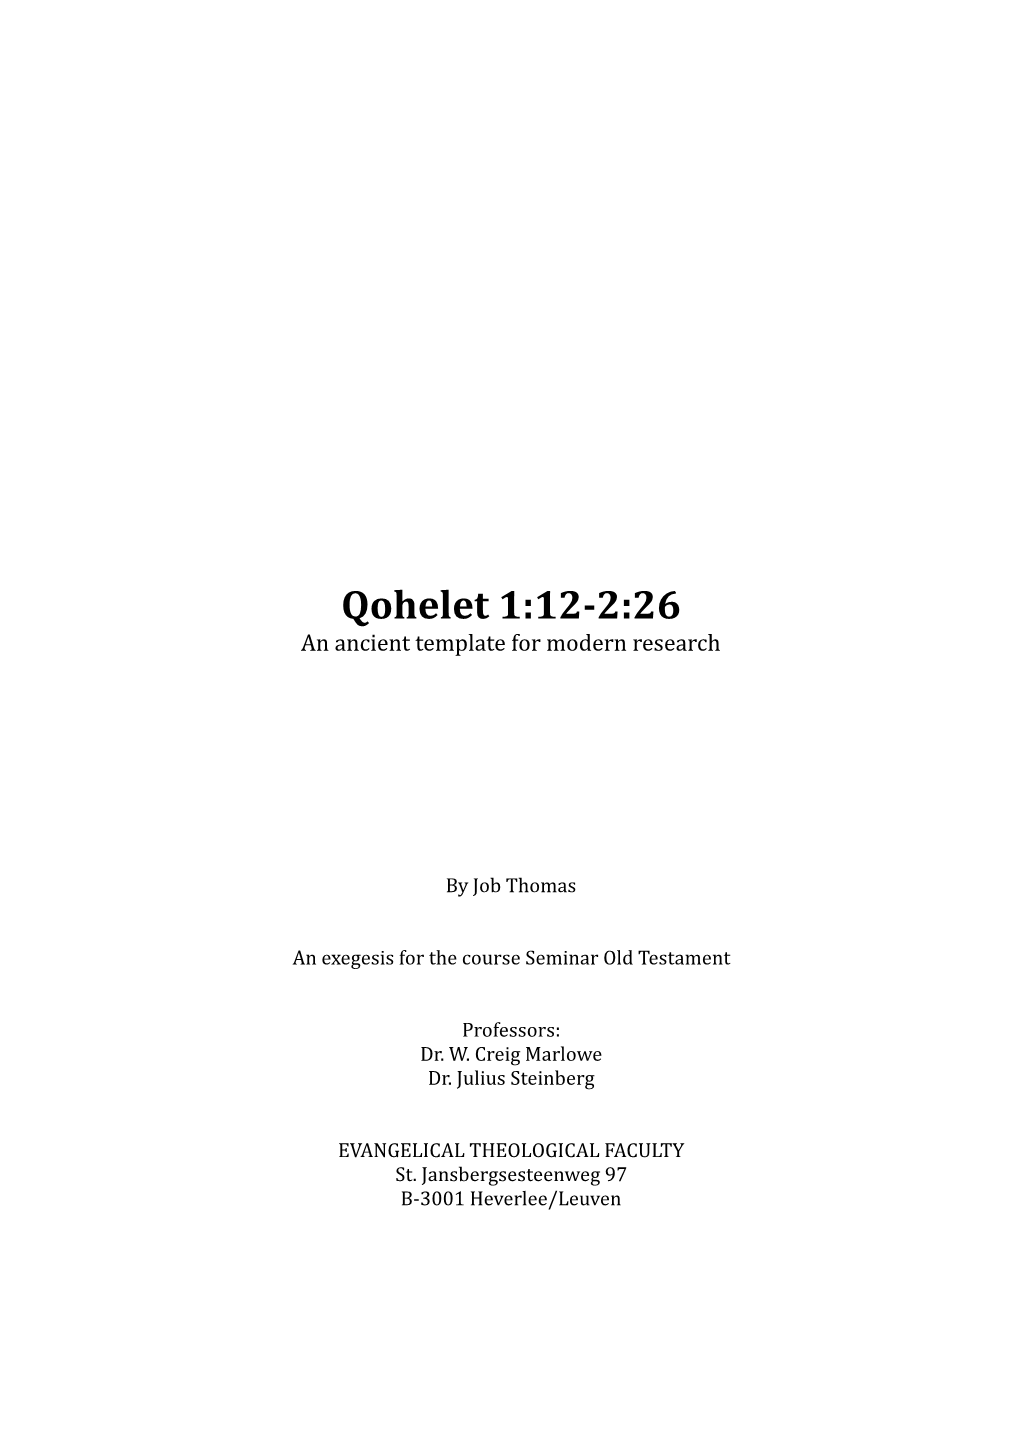 Qohelet 1:12-2:26 an Ancient Template for Modern Research